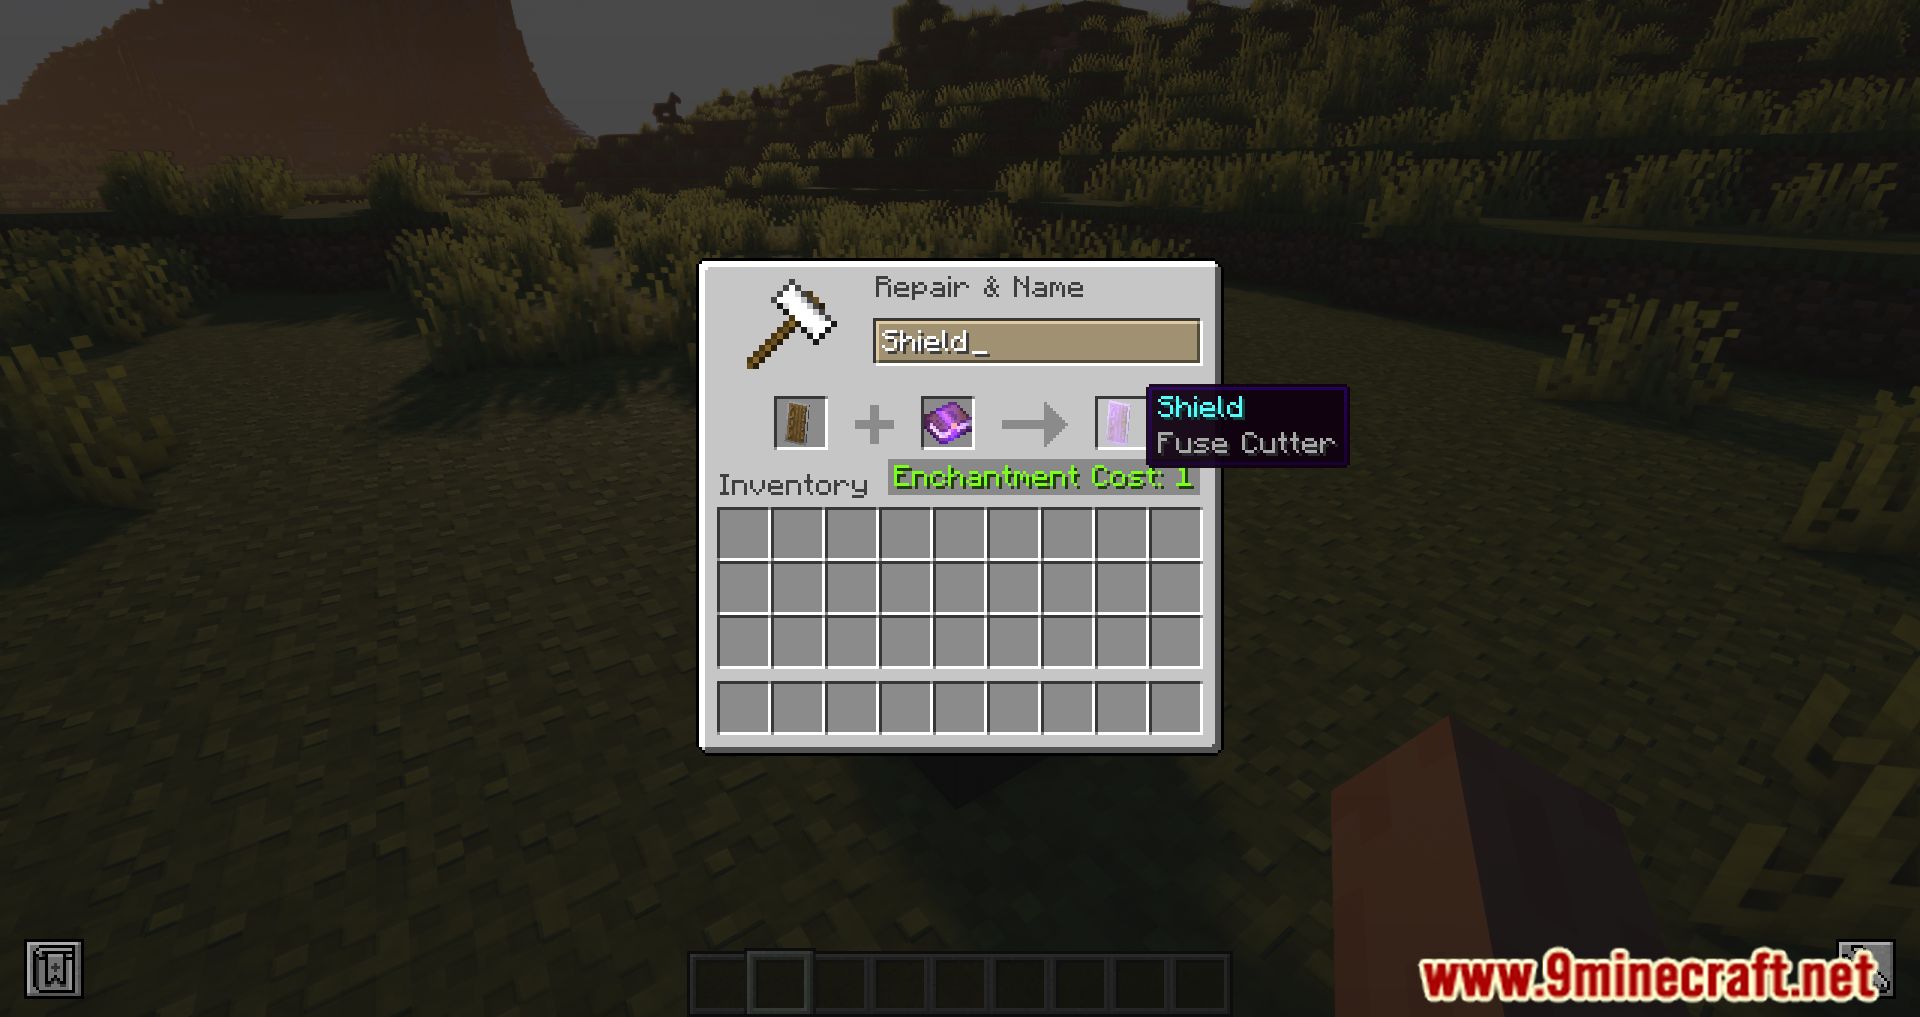 Unique Enchantments Mod (1.19.2, 1.16.5) - Have Something Special 